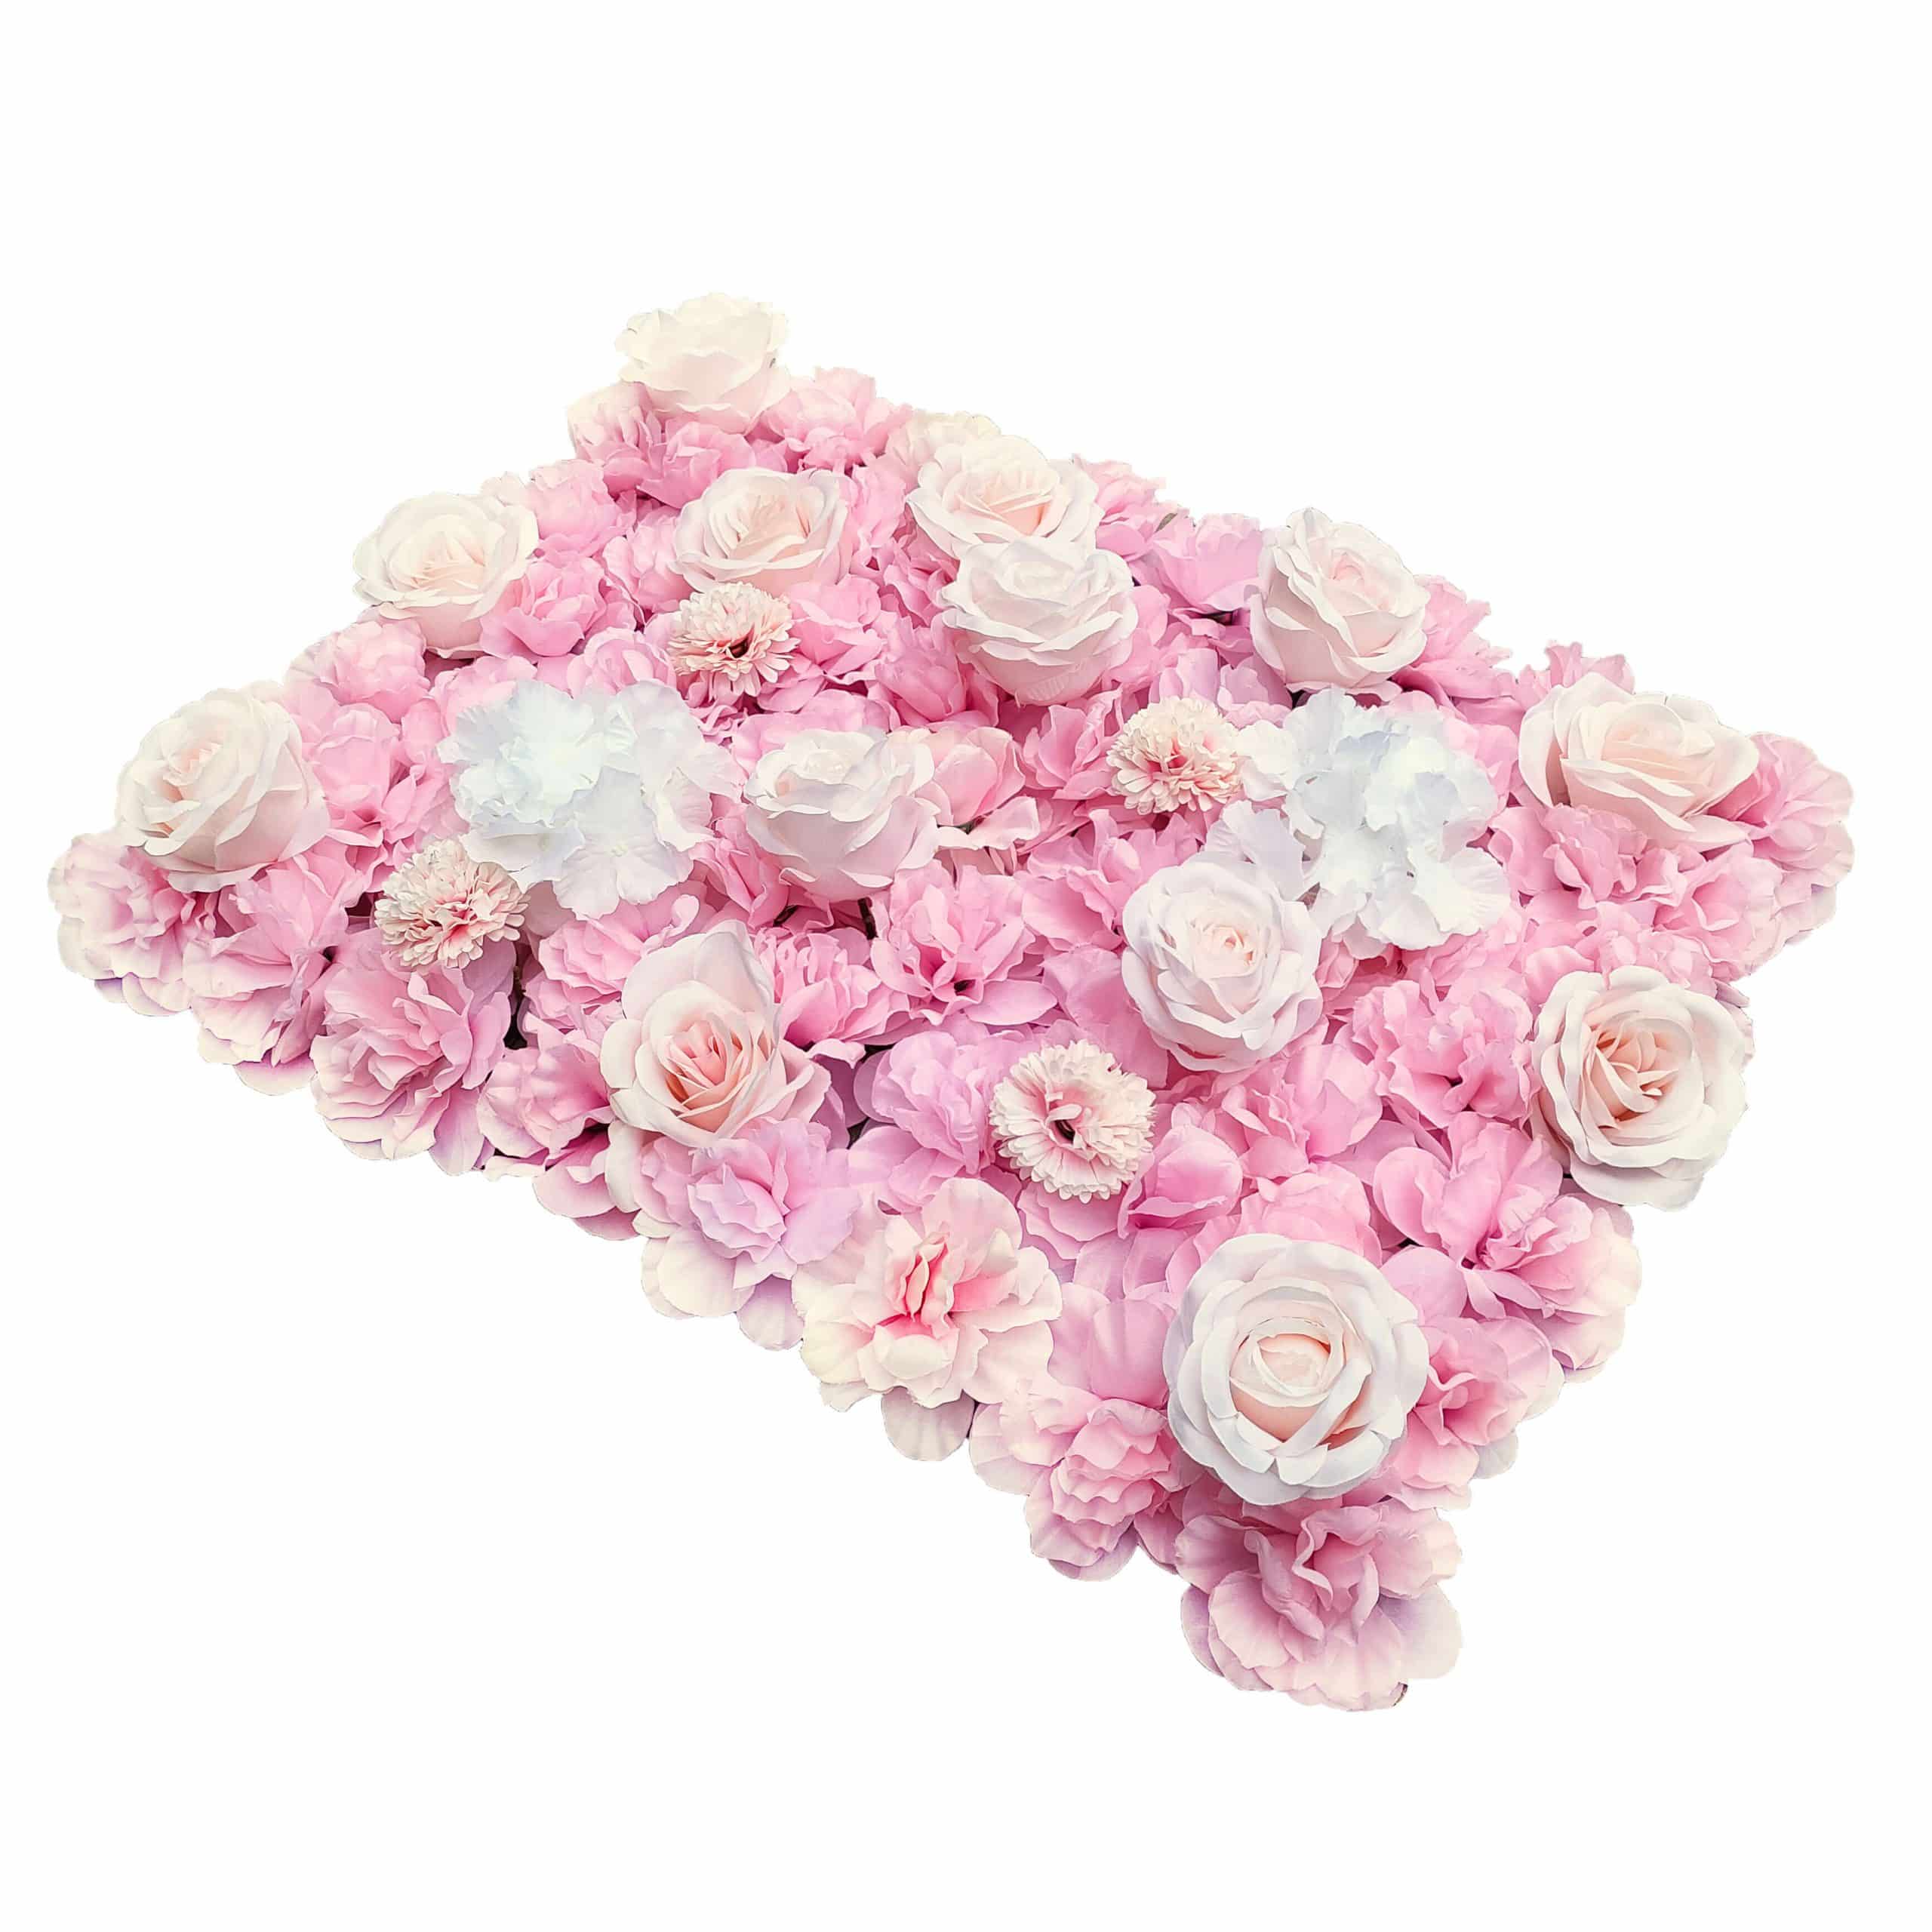 Artificial Flower Wall Pink and White Flowers Side View of Corners